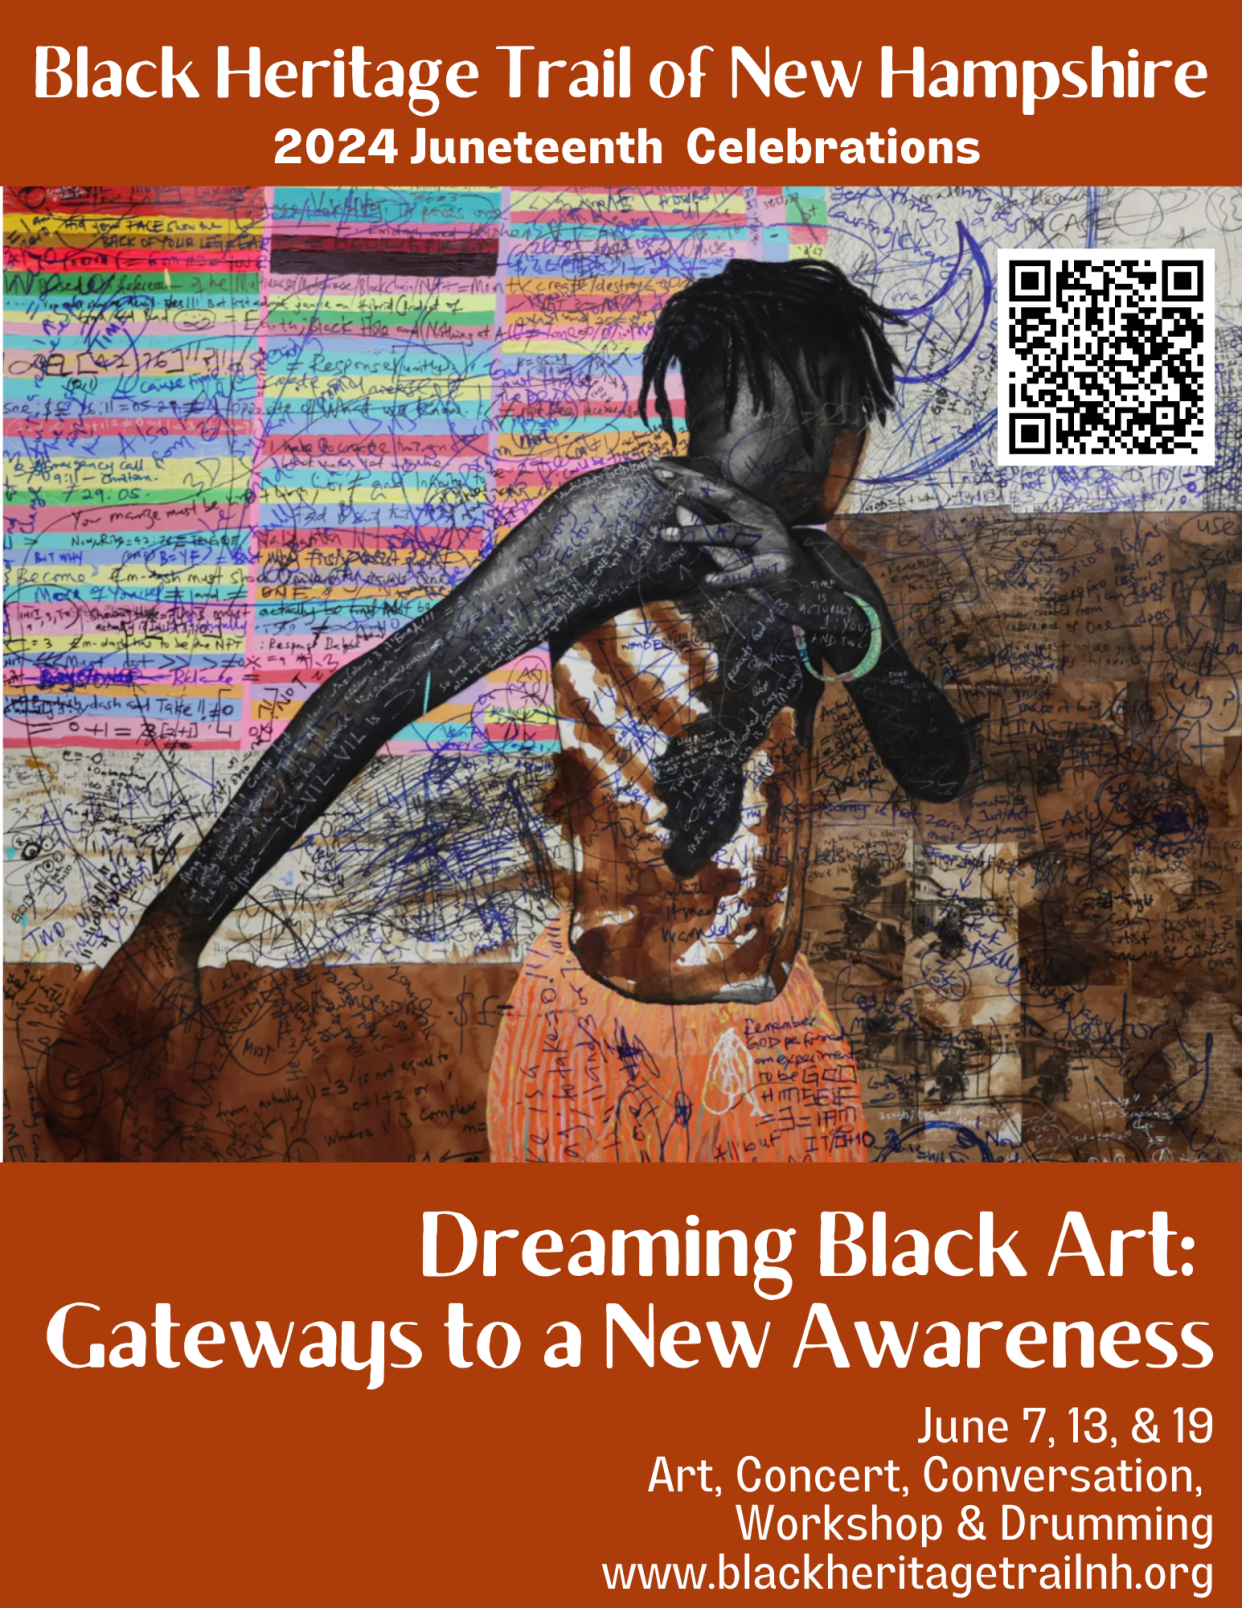 Black Heritage Trail of New Hampshire presents Juneteenth 2024 celebration themed 'Dreaming Black Art: Gateways to a New Awareness' on June 7, 13, and 19.